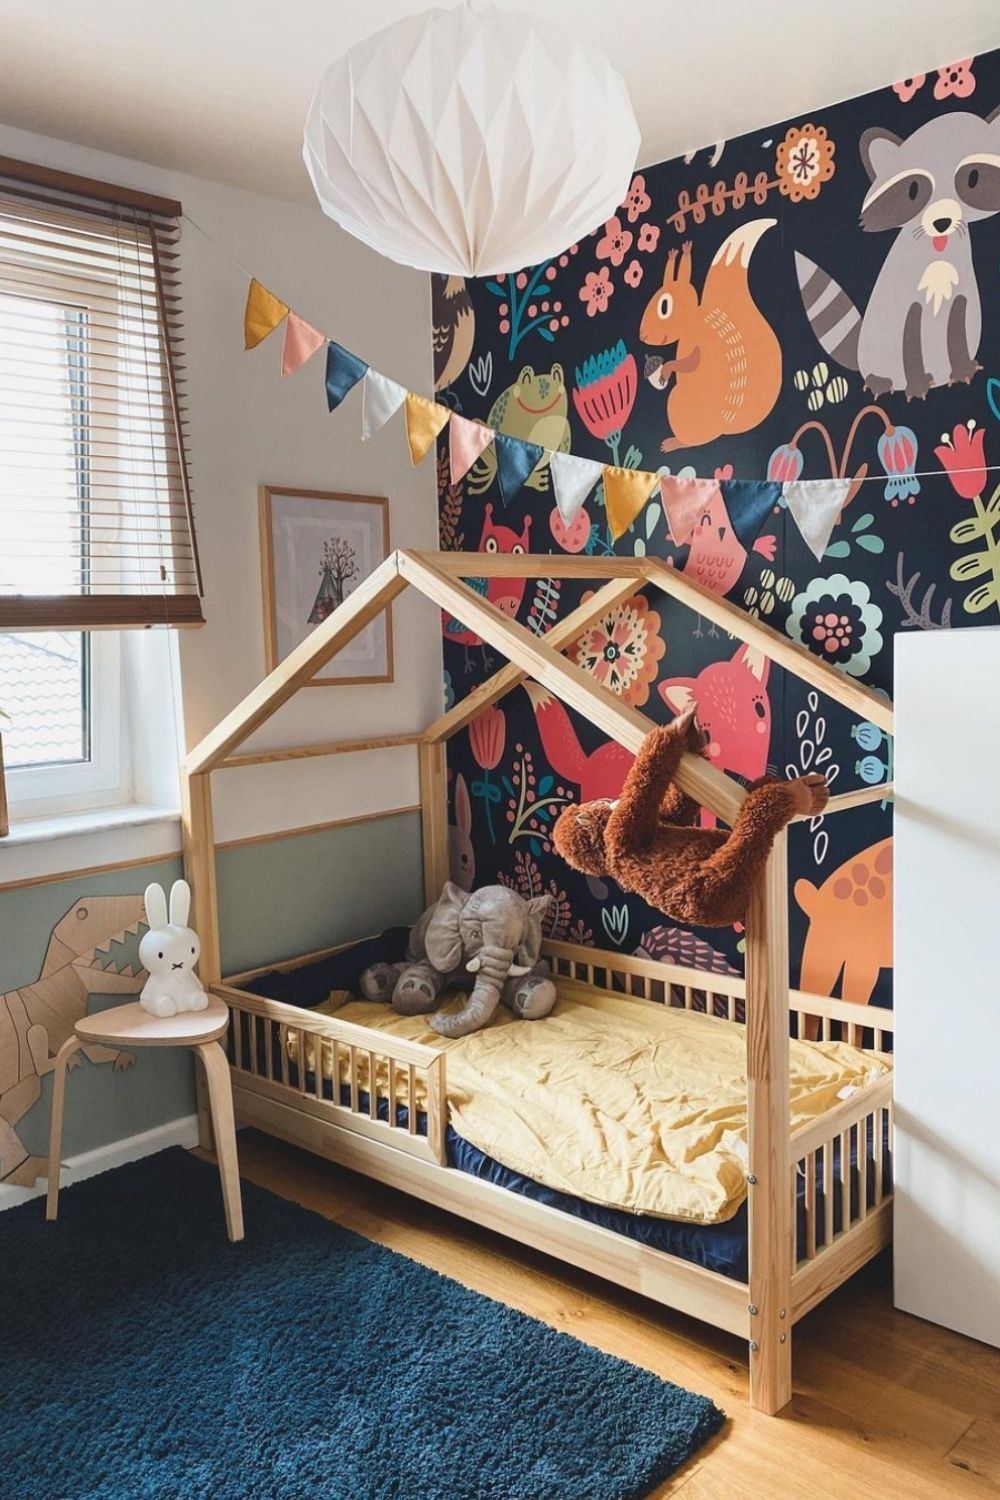 24 Lovely Nursery Room Ideas To Bring Up Your Baby With Taste 